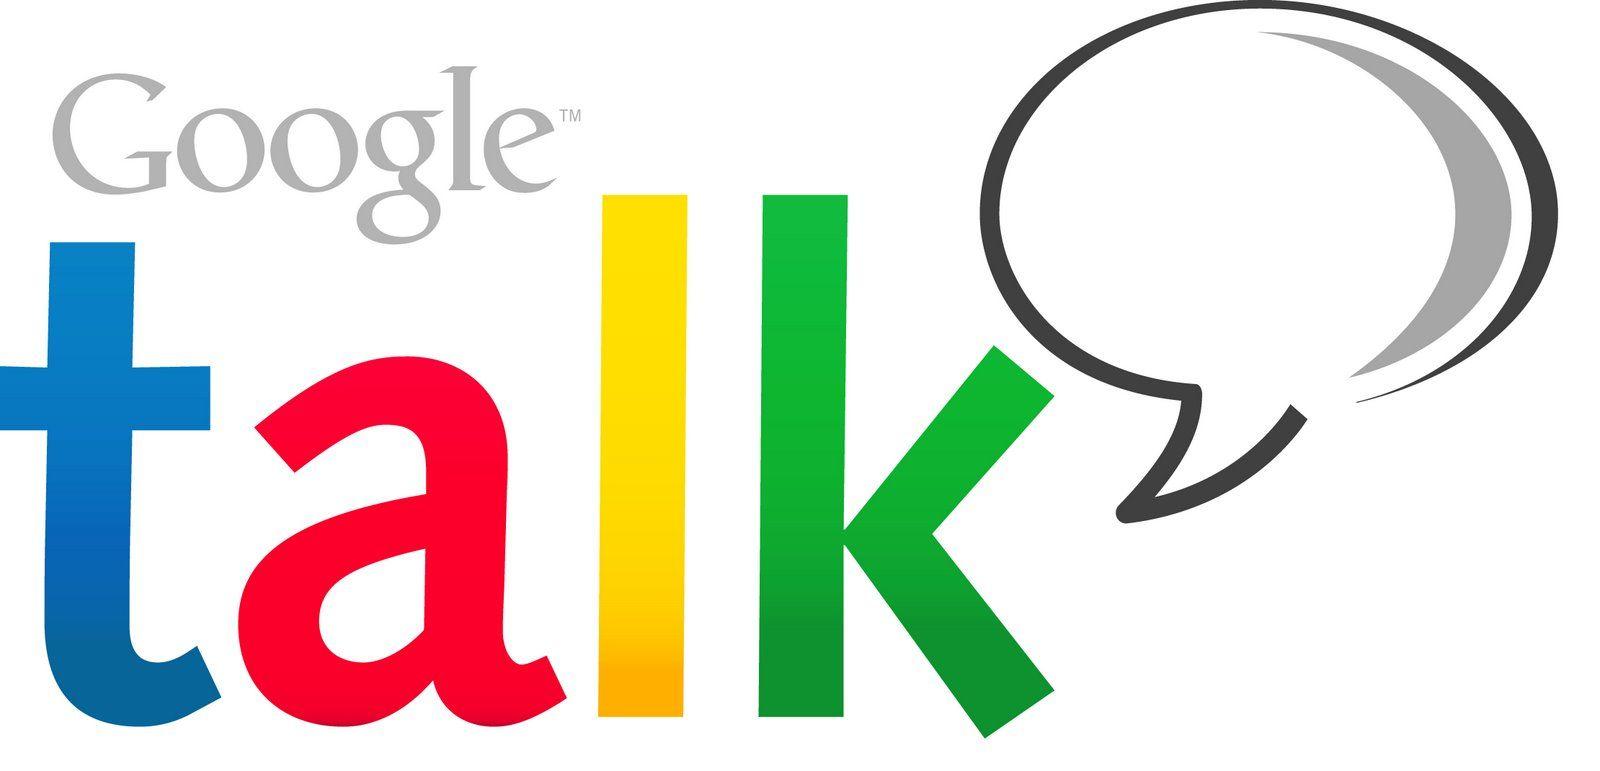 Google Talk Logo - Gchat Experiencing Mass Outage - Refined Guy